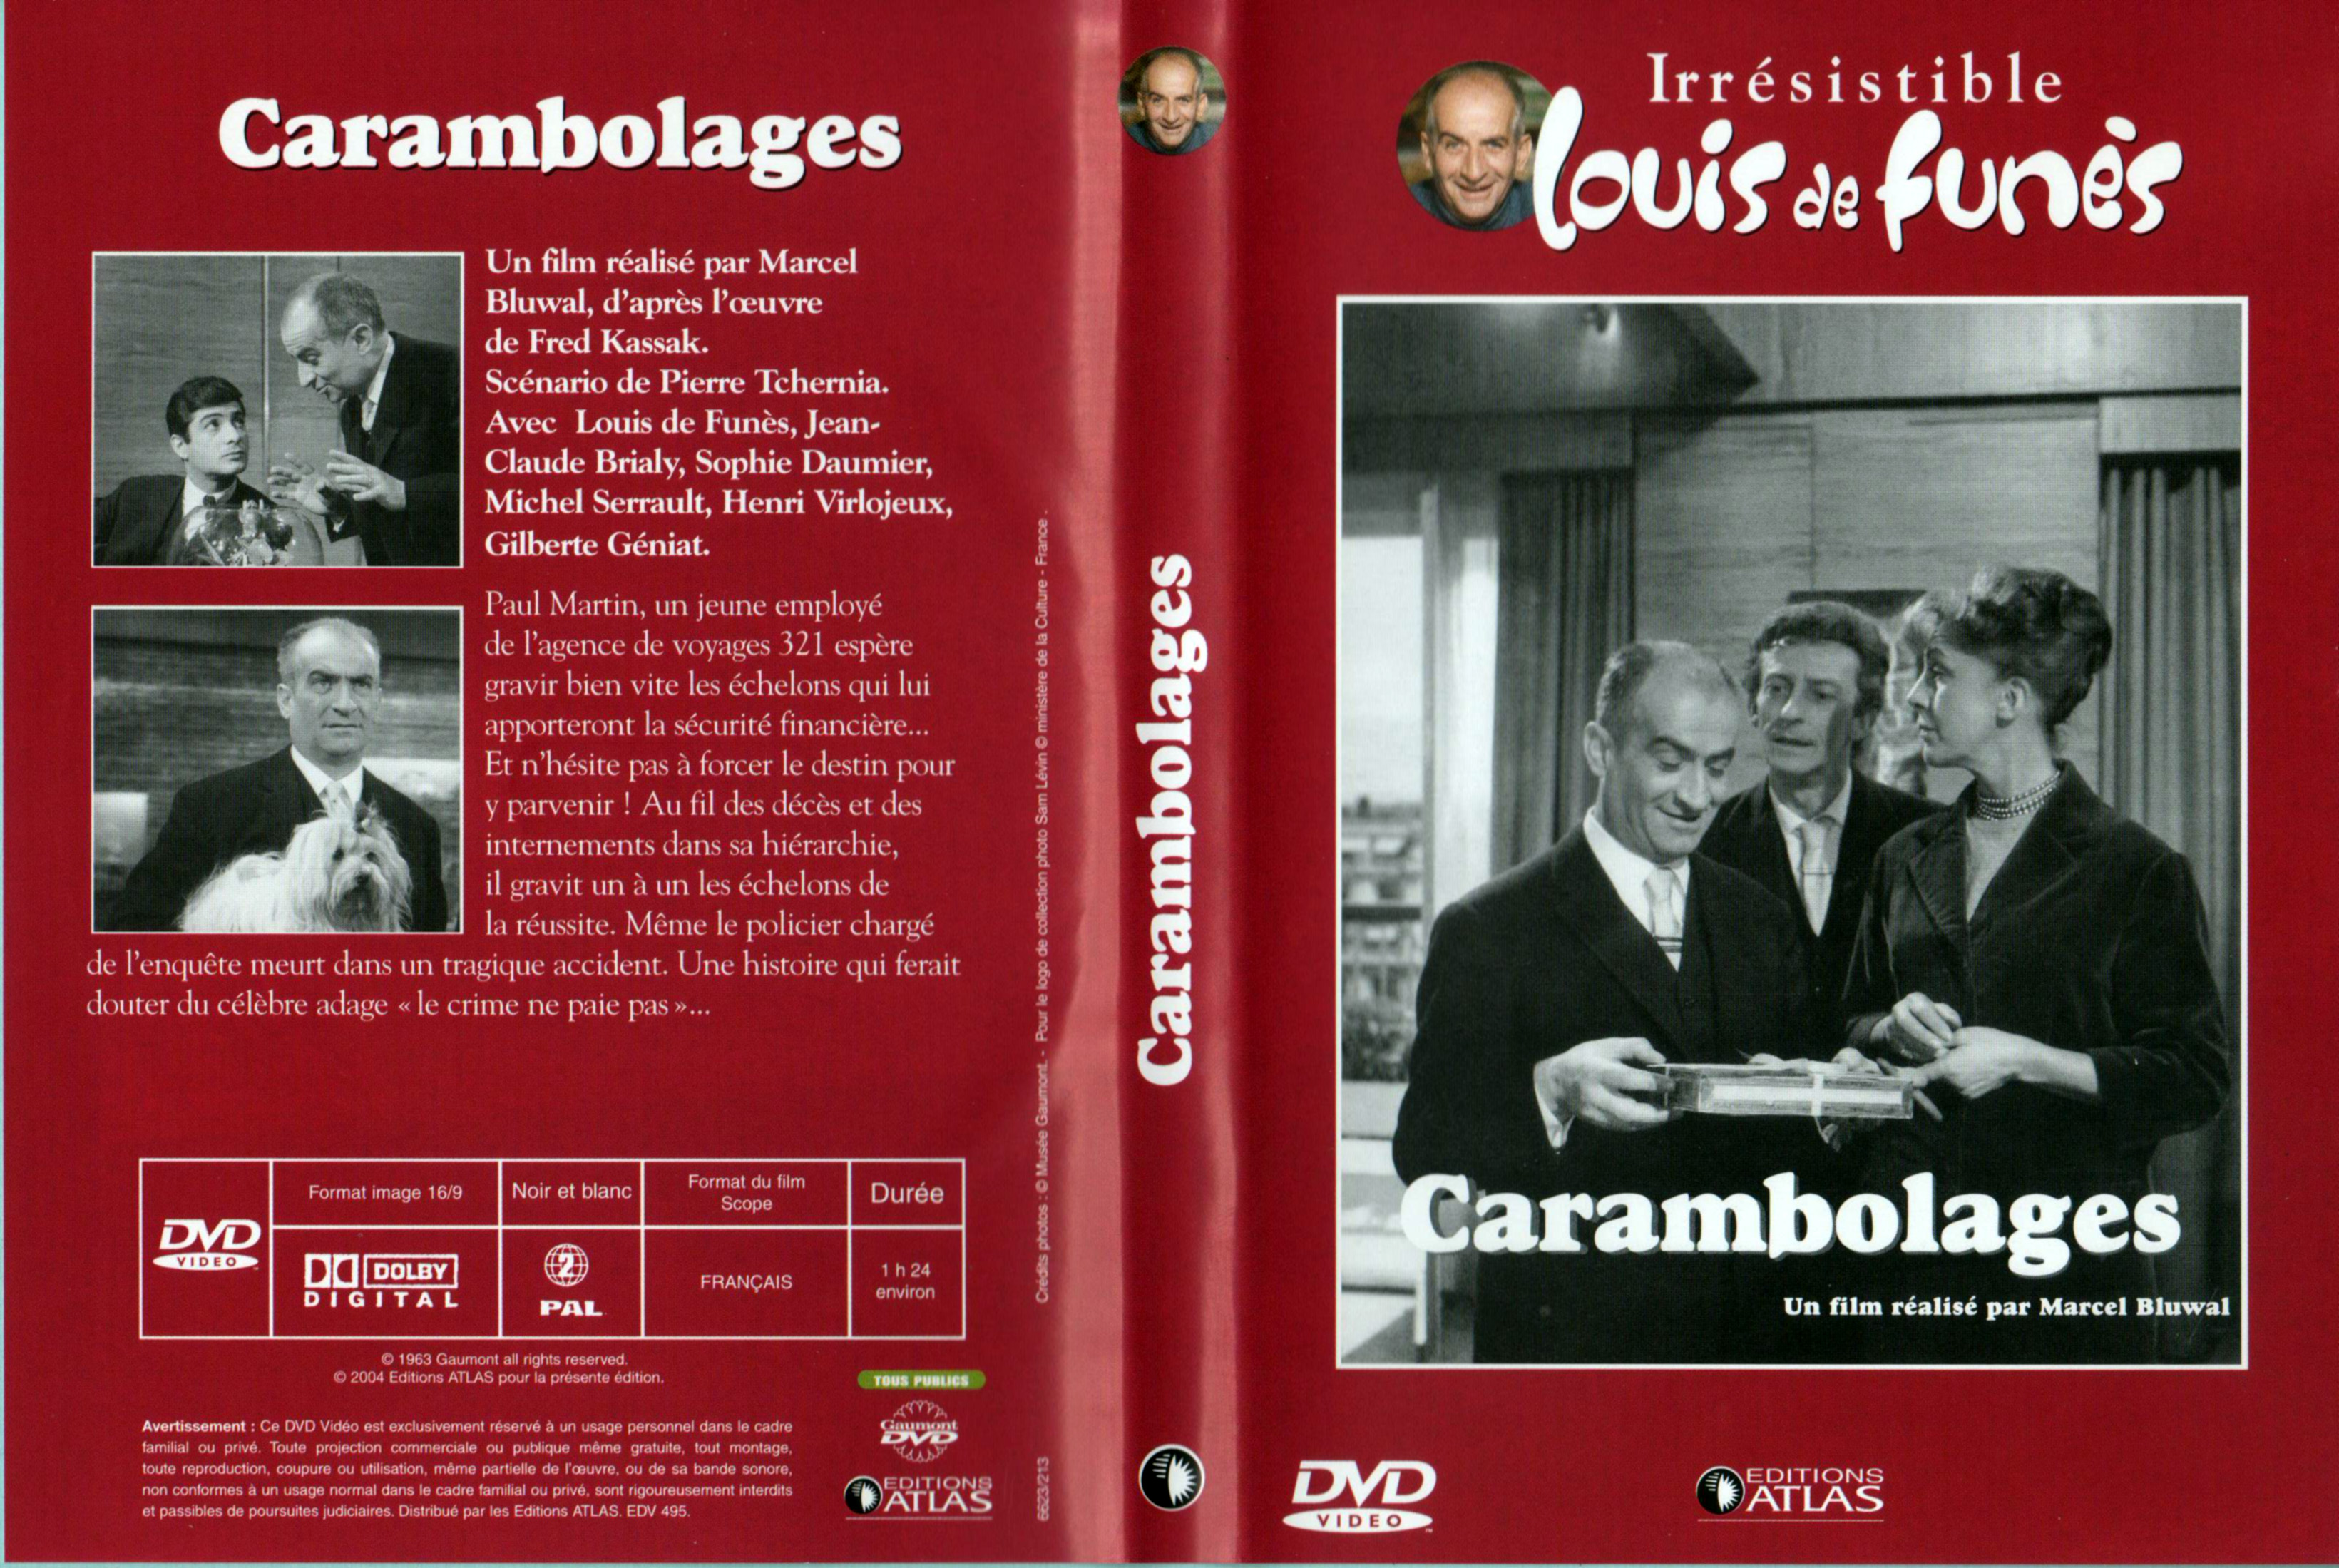 Jaquette DVD Carambolages v2